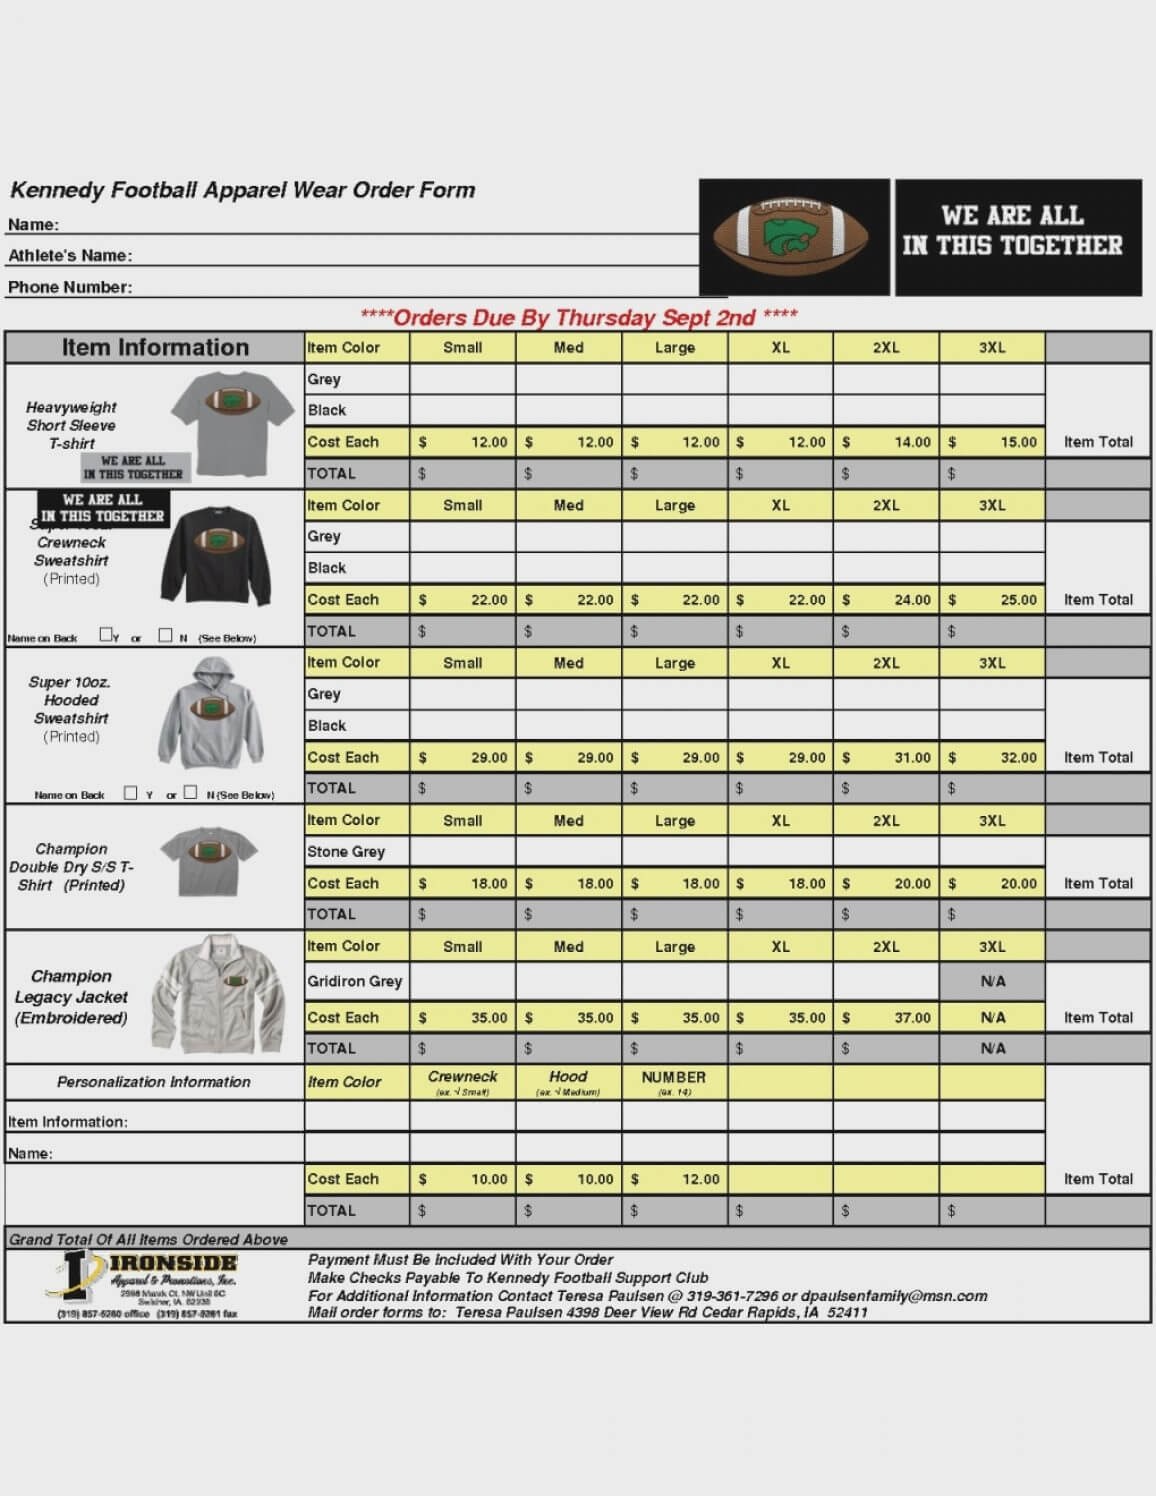 026 Apparel Order Form Template Ideas Systematic Functional With Apparel Order Form Template